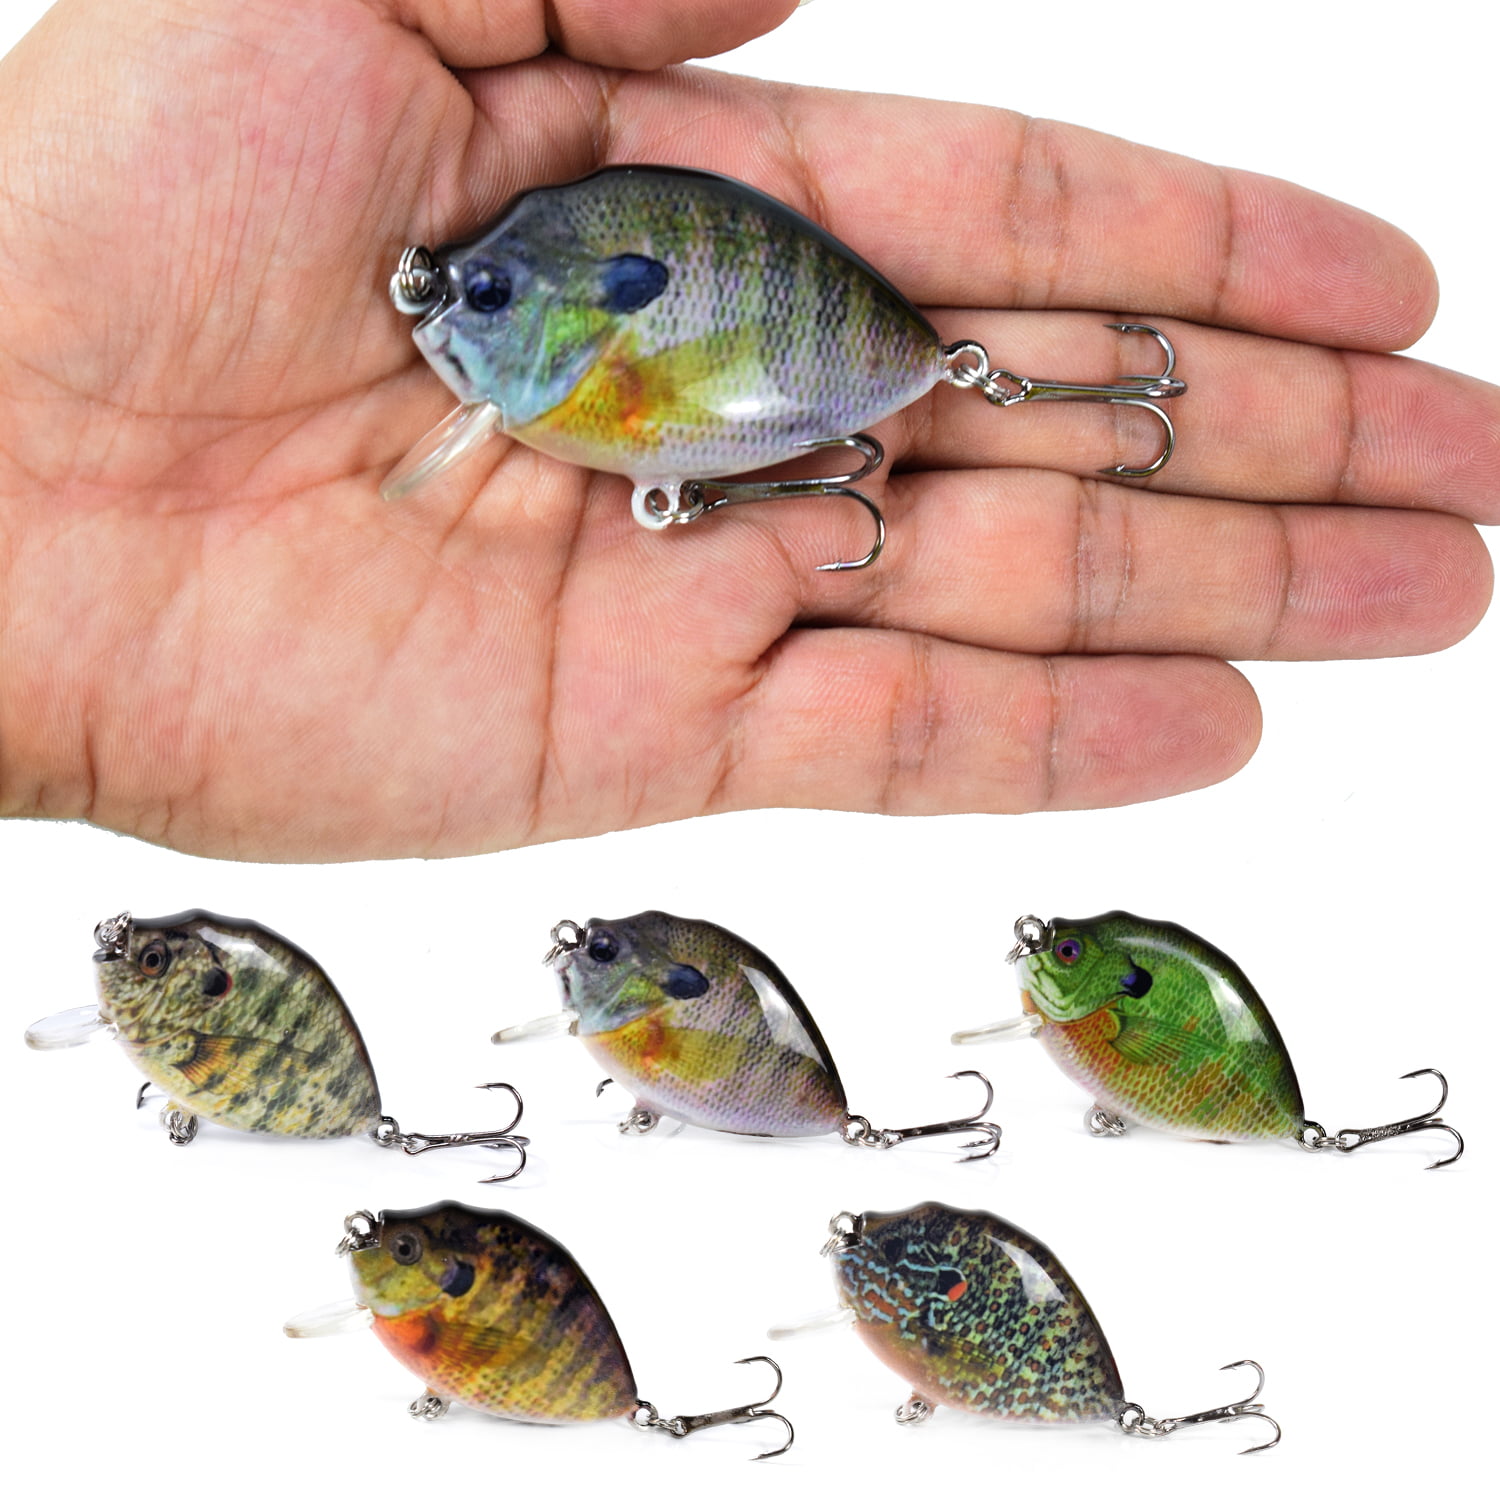 Lixada 5pcs Lures 6cm 15g Mini Wobbler Lure Artificial Hard Bait Crankbait with Tackle Box for Bass Tackle, Other